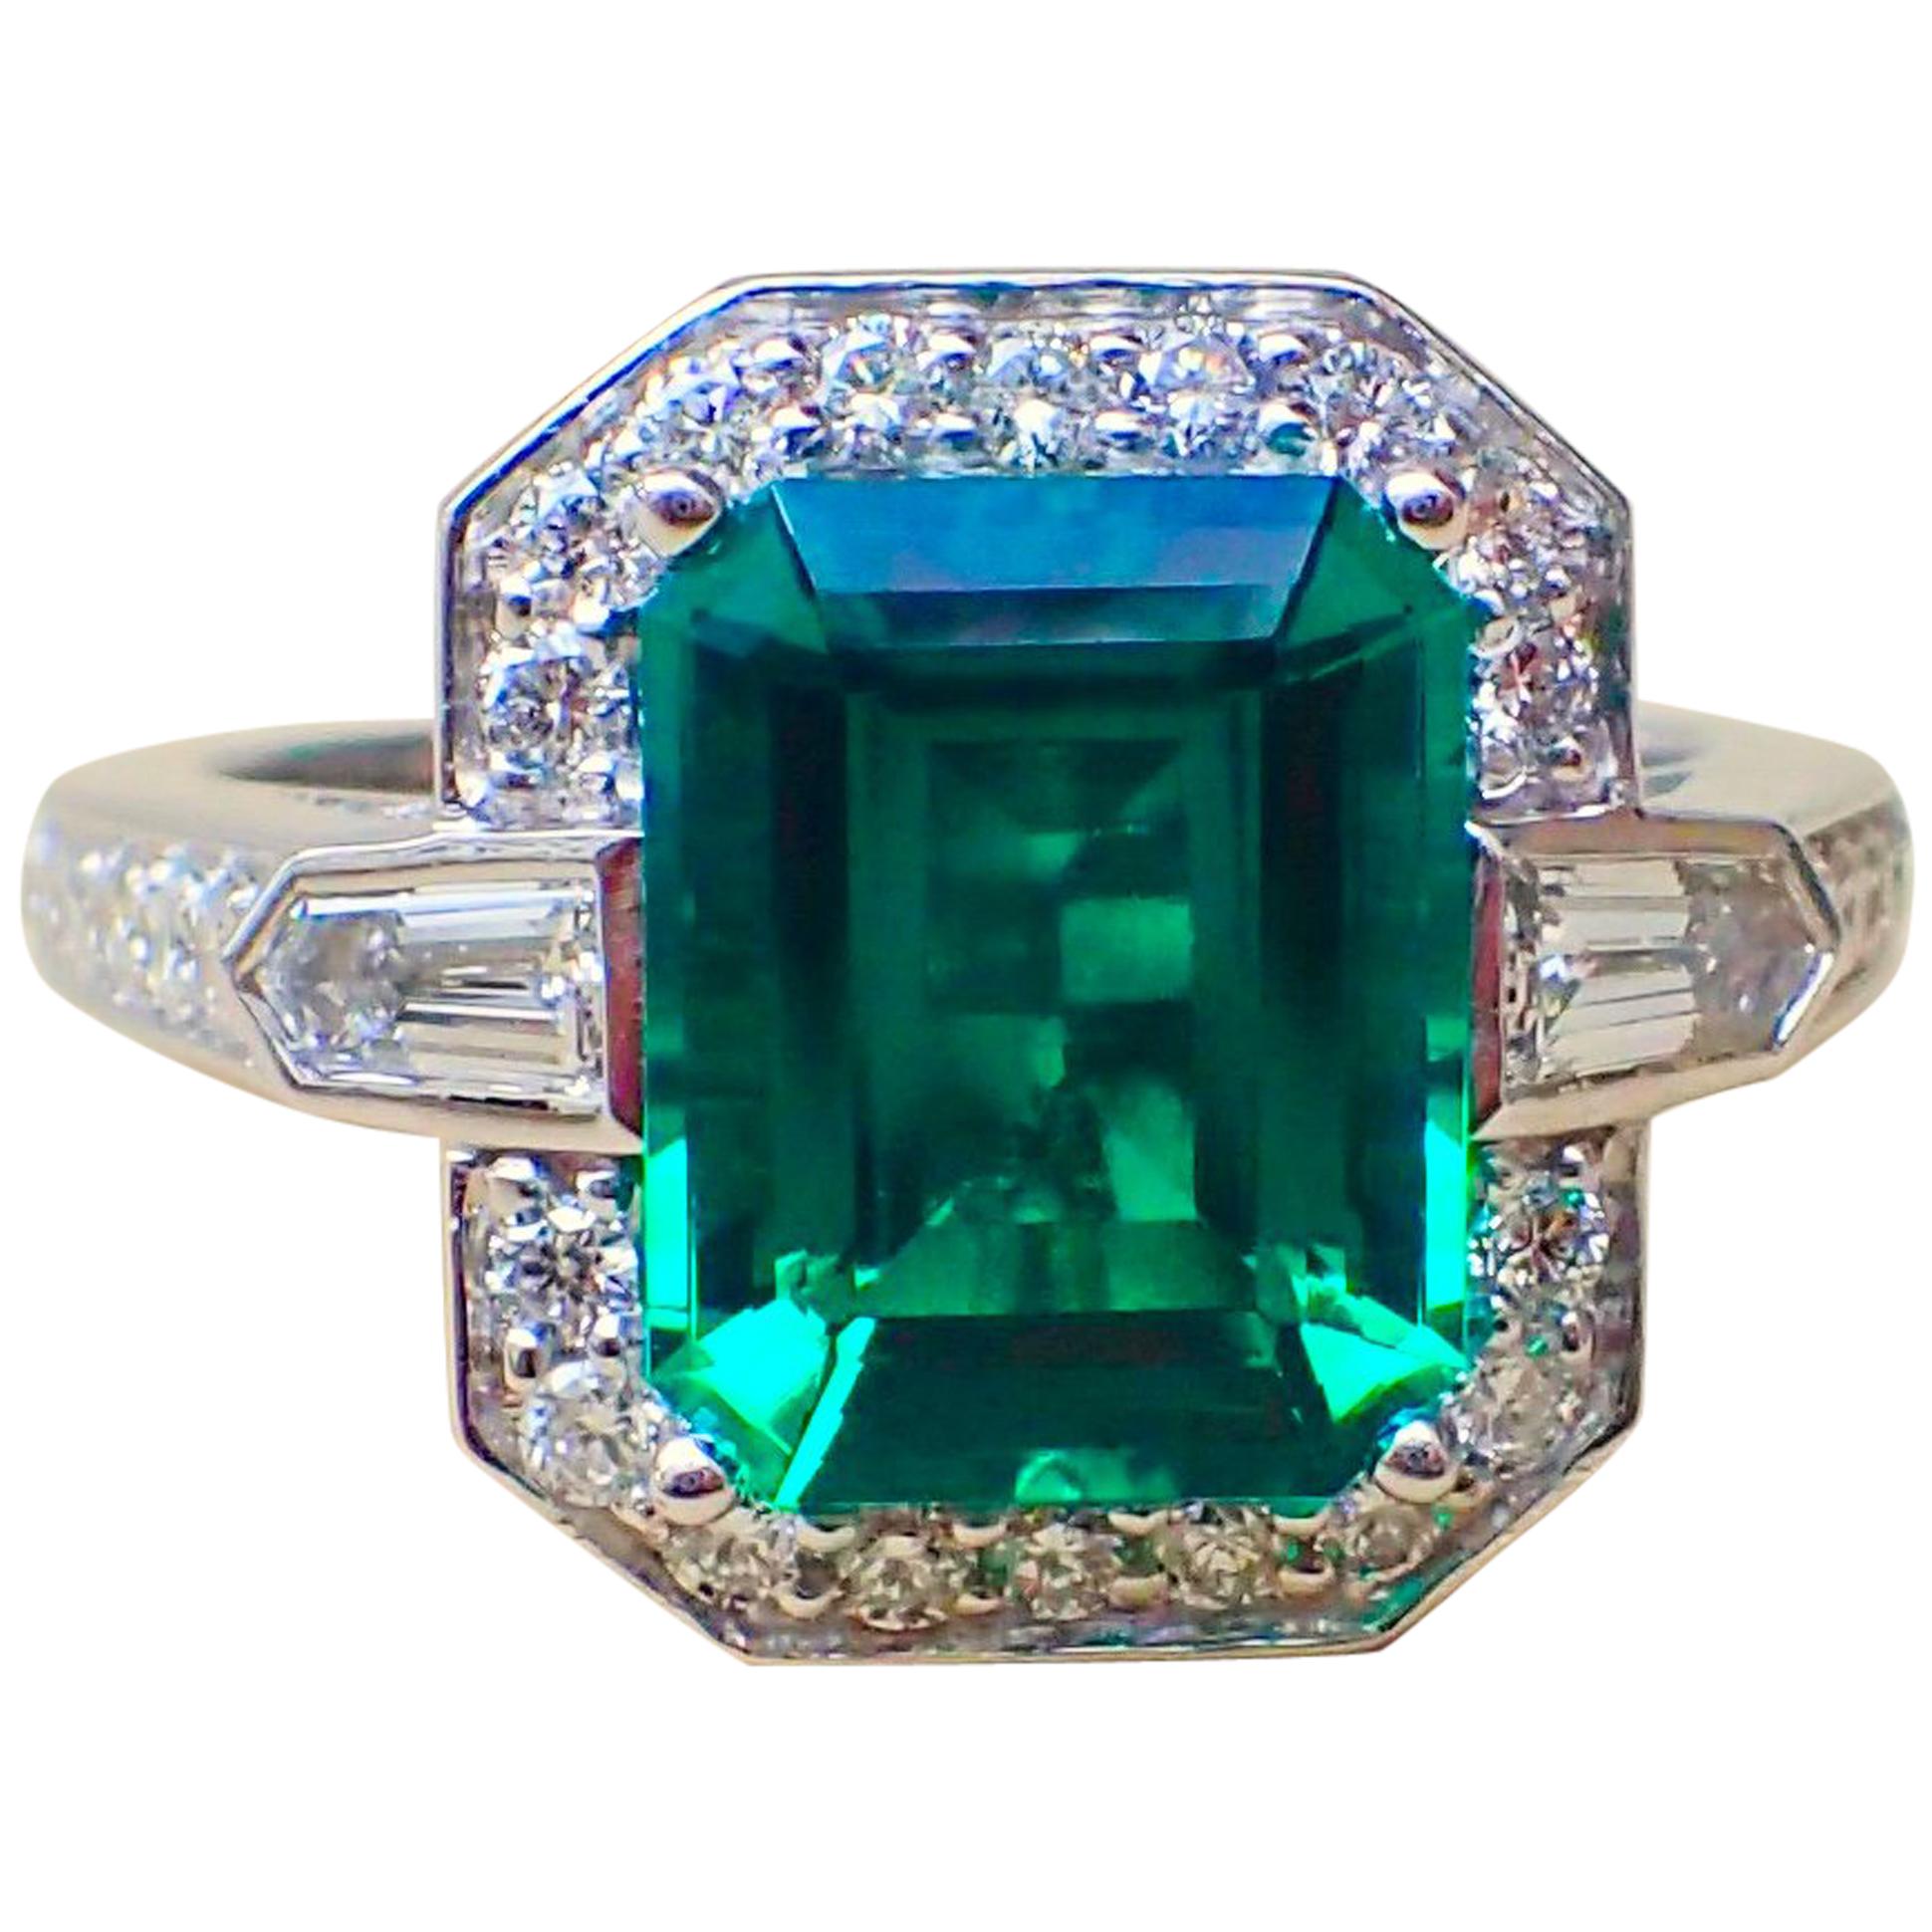 An 18k white gold ring is set with one (1) Emerald Cut Chatham-Created Emerald that measures 10mm x 8mm and weighs 2.83 carats with Clarity Grade VS-VVS and two (2) Bullet Cut Diamonds, one that measures 4.1mm x 2.3mm and weighs 0.14 carats with